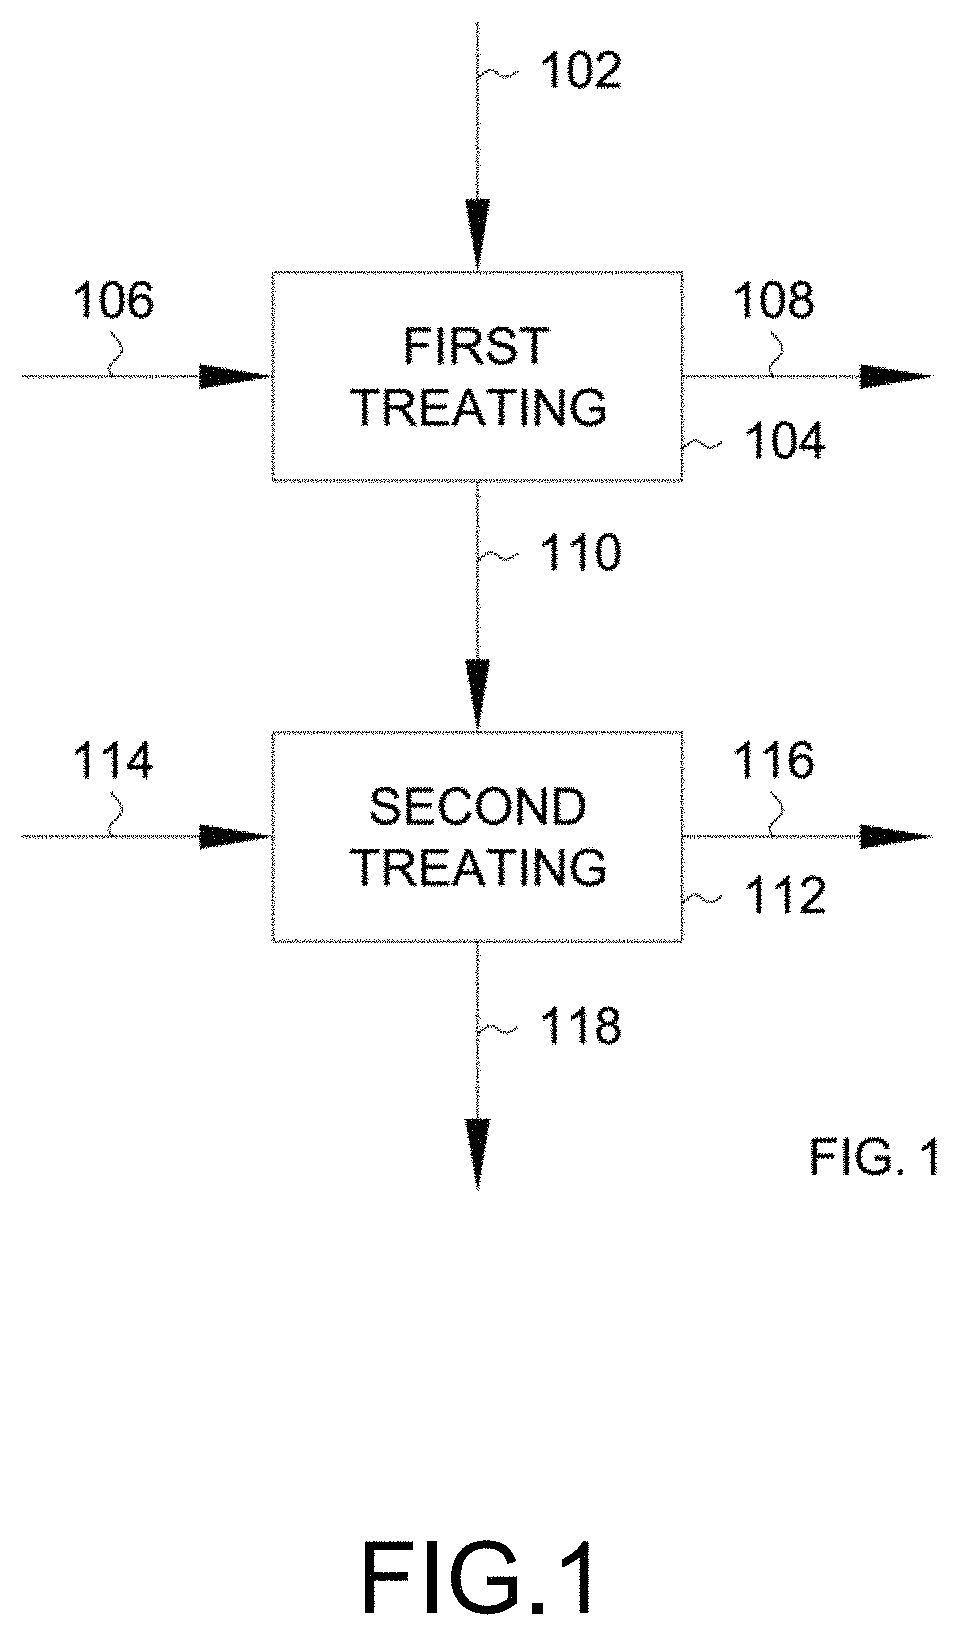 Removal of sizing material from reinforcing fibers for recycling of reinforcing fibers